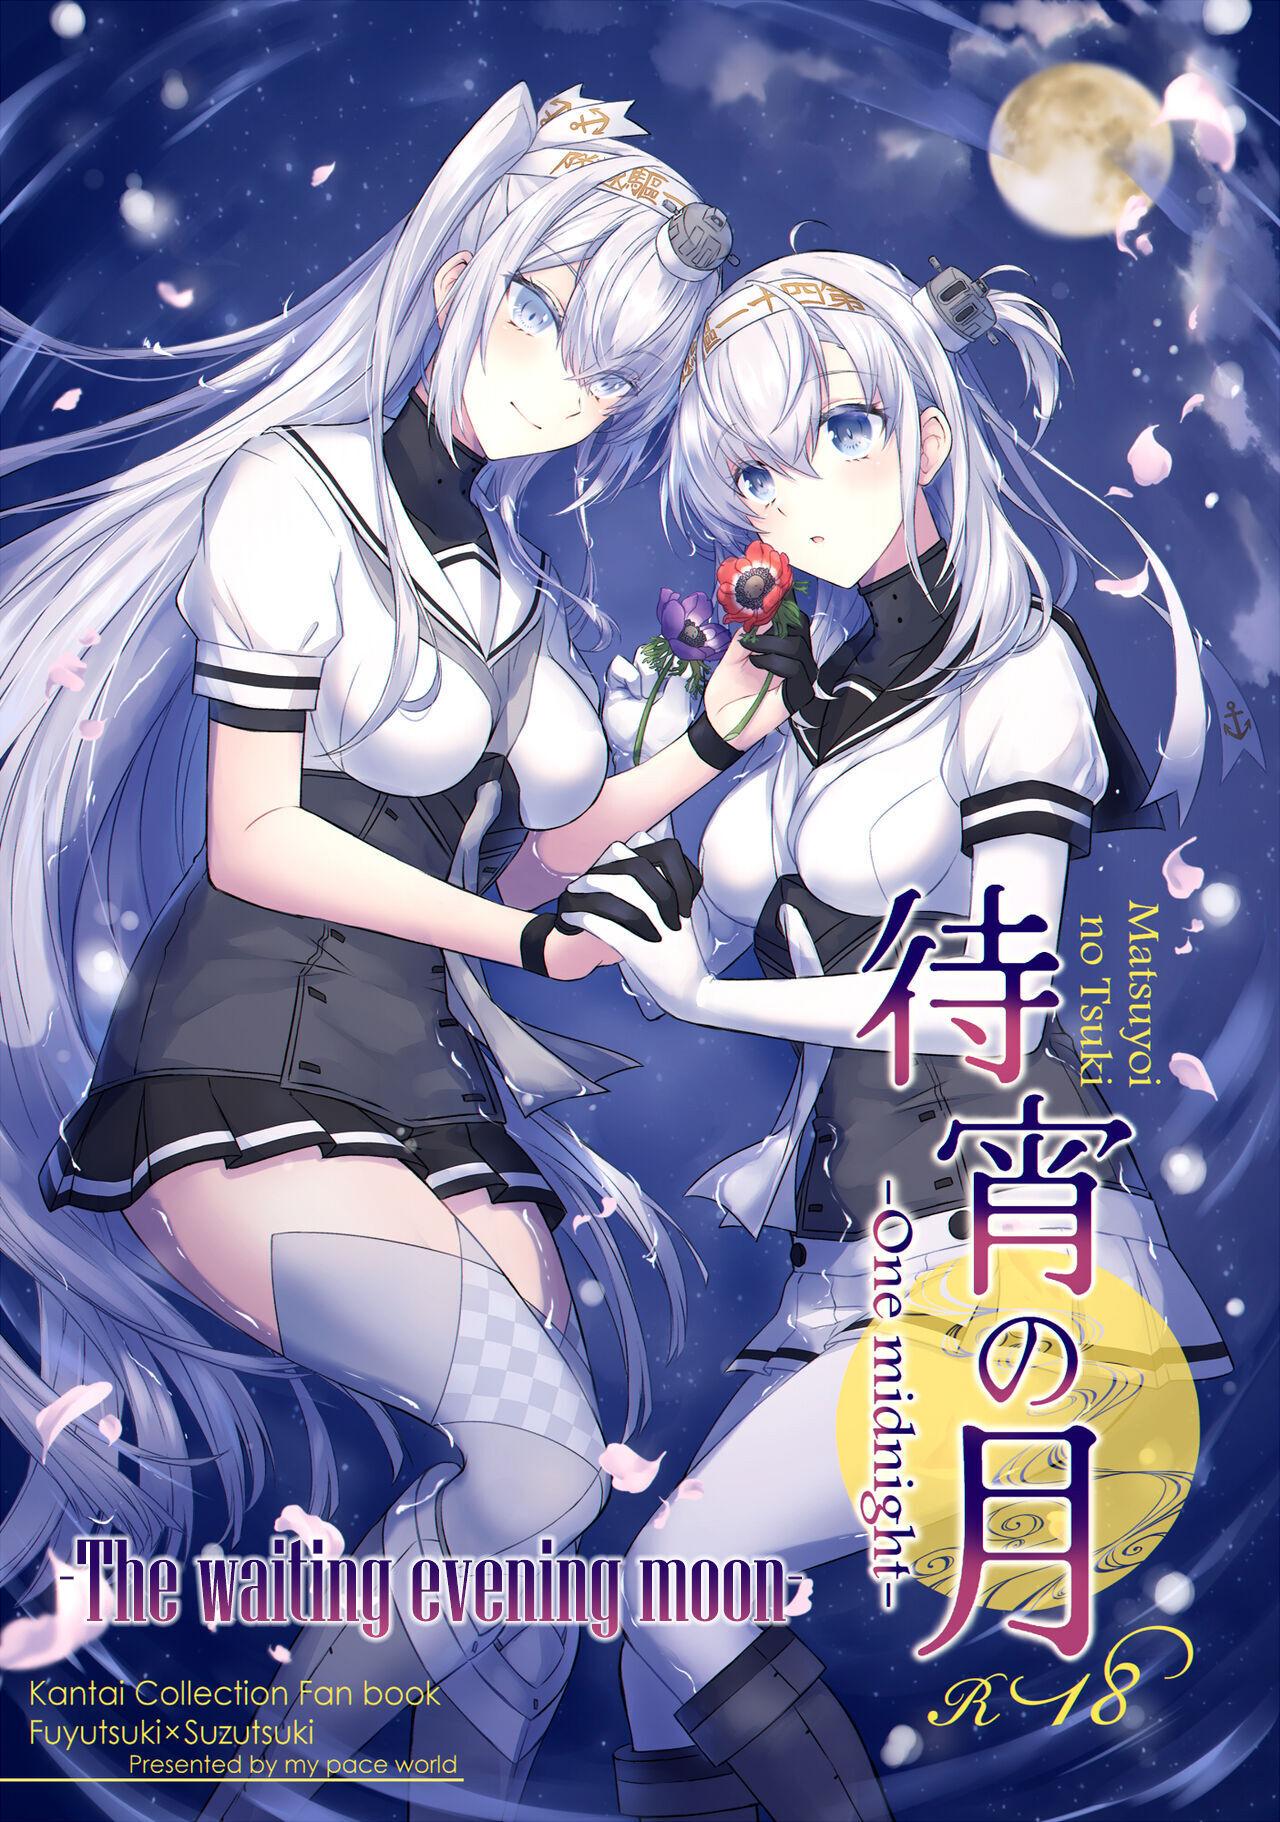 Dicksucking [my pace world (Kabocha Torte)] Matsuyoi no tsuki -One Midnight- | The waiting evening moon -One Midnight- (Kantai Collection -KanColle-) [English] [Digital] - Kantai collection Wet Cunts - Page 1